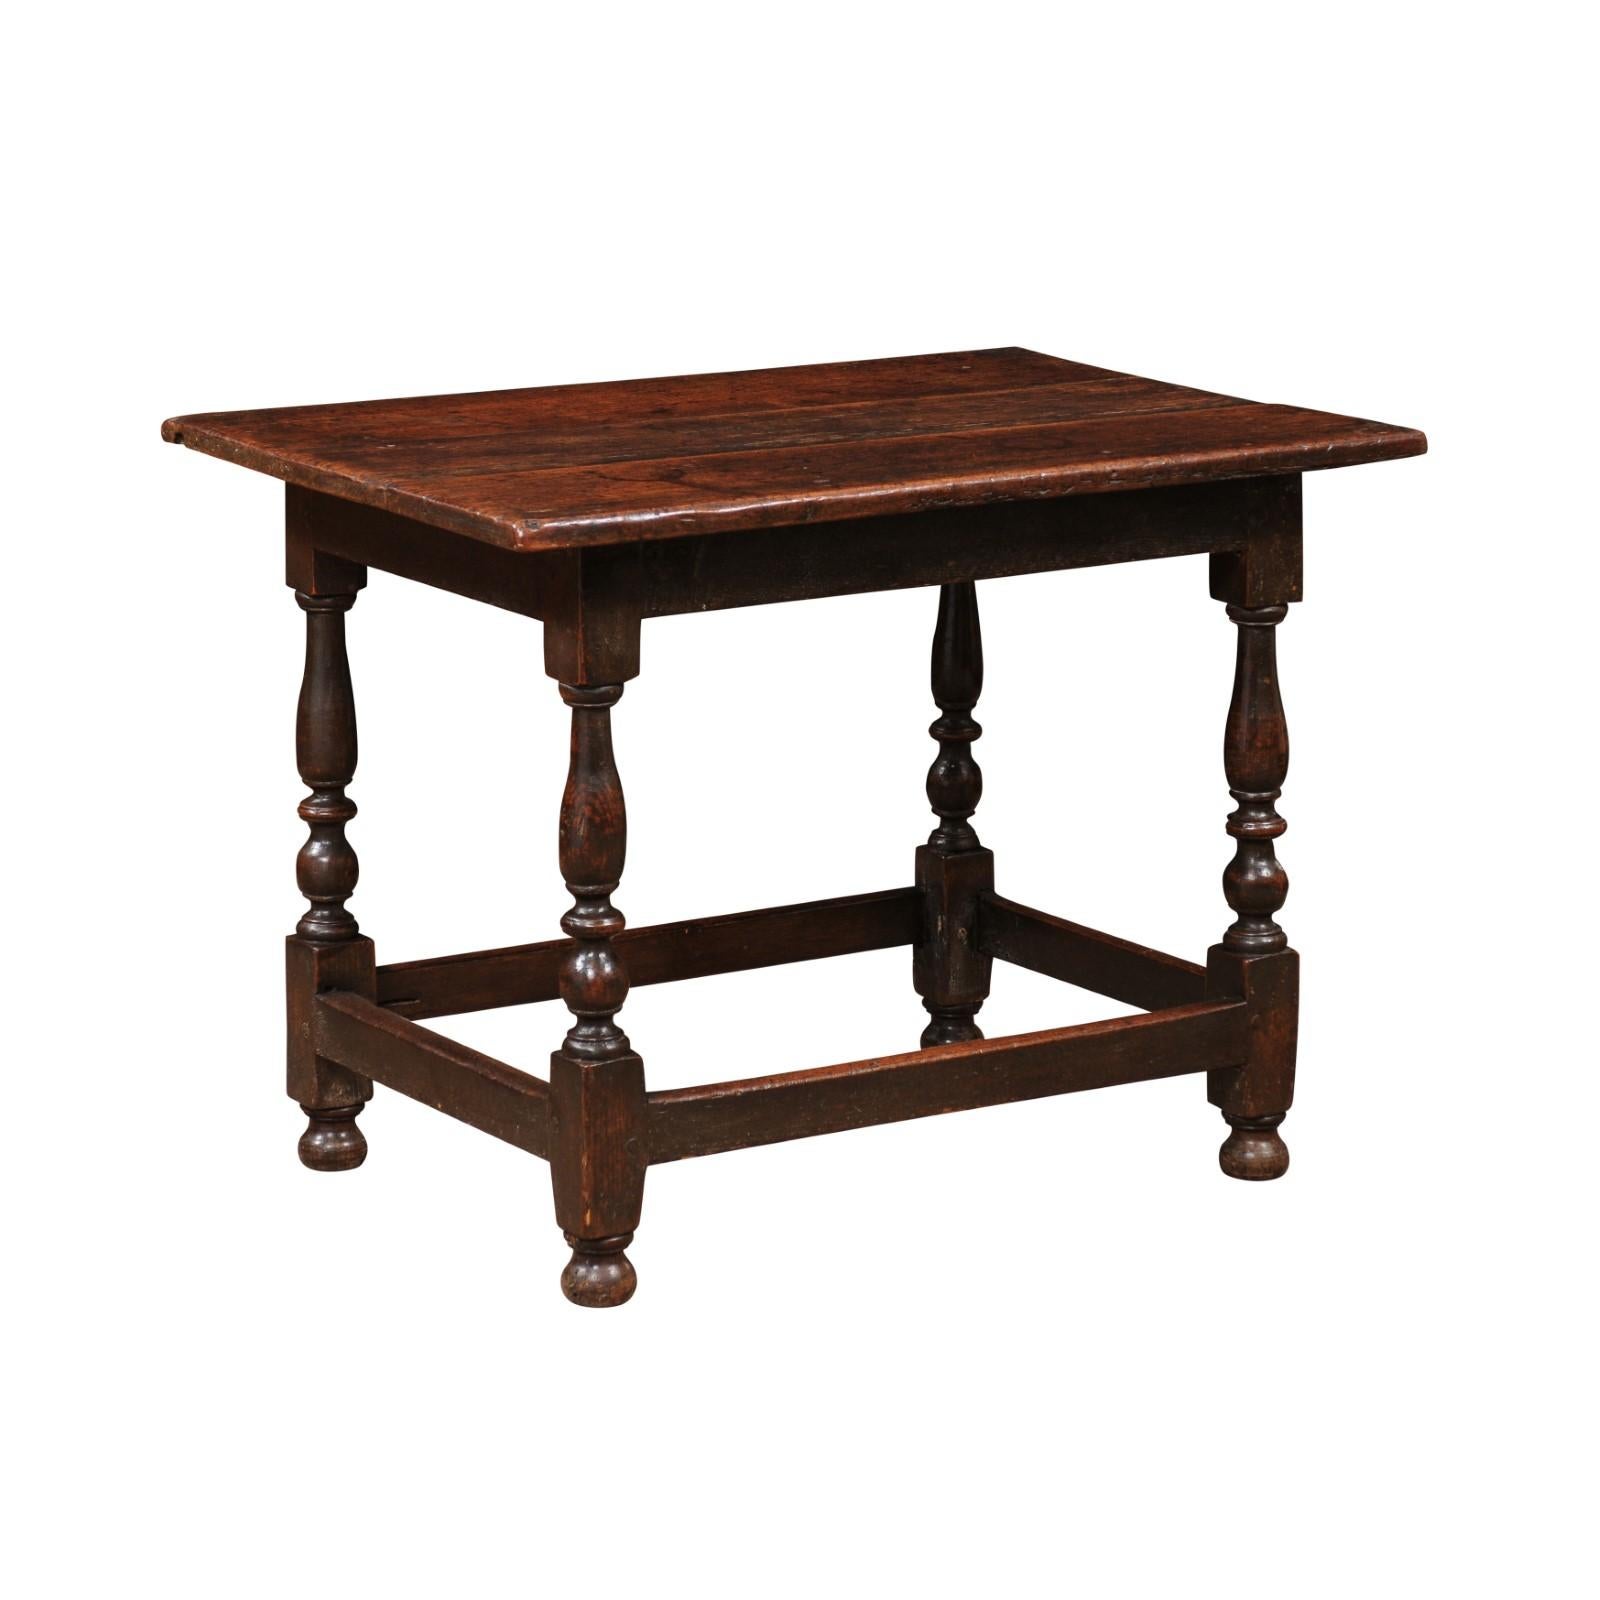 18th Century English William & Mary Oak Tavern Table with Turned Legs In Good Condition For Sale In Atlanta, GA